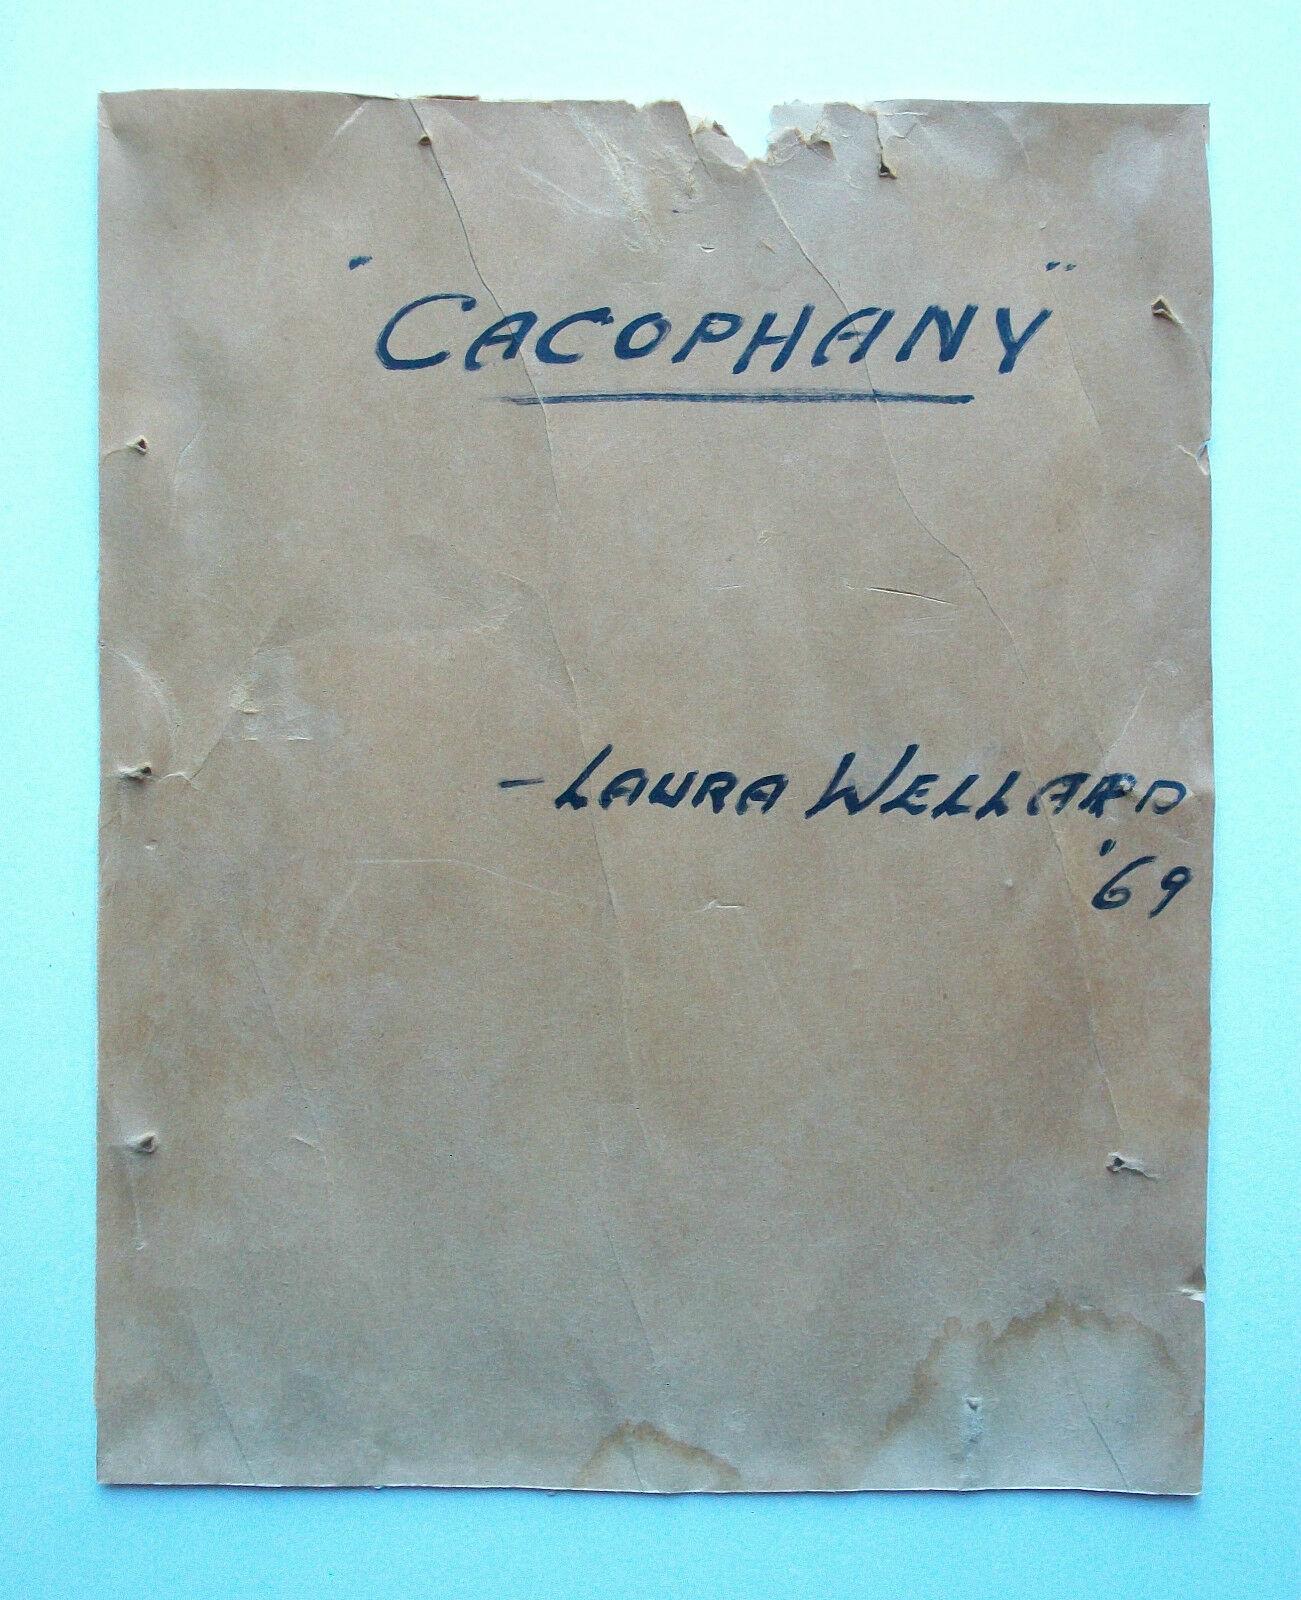 Laura Wellard, Cacophony, Mid Century Expressionist Painting, Canada, C.1969 For Sale 5